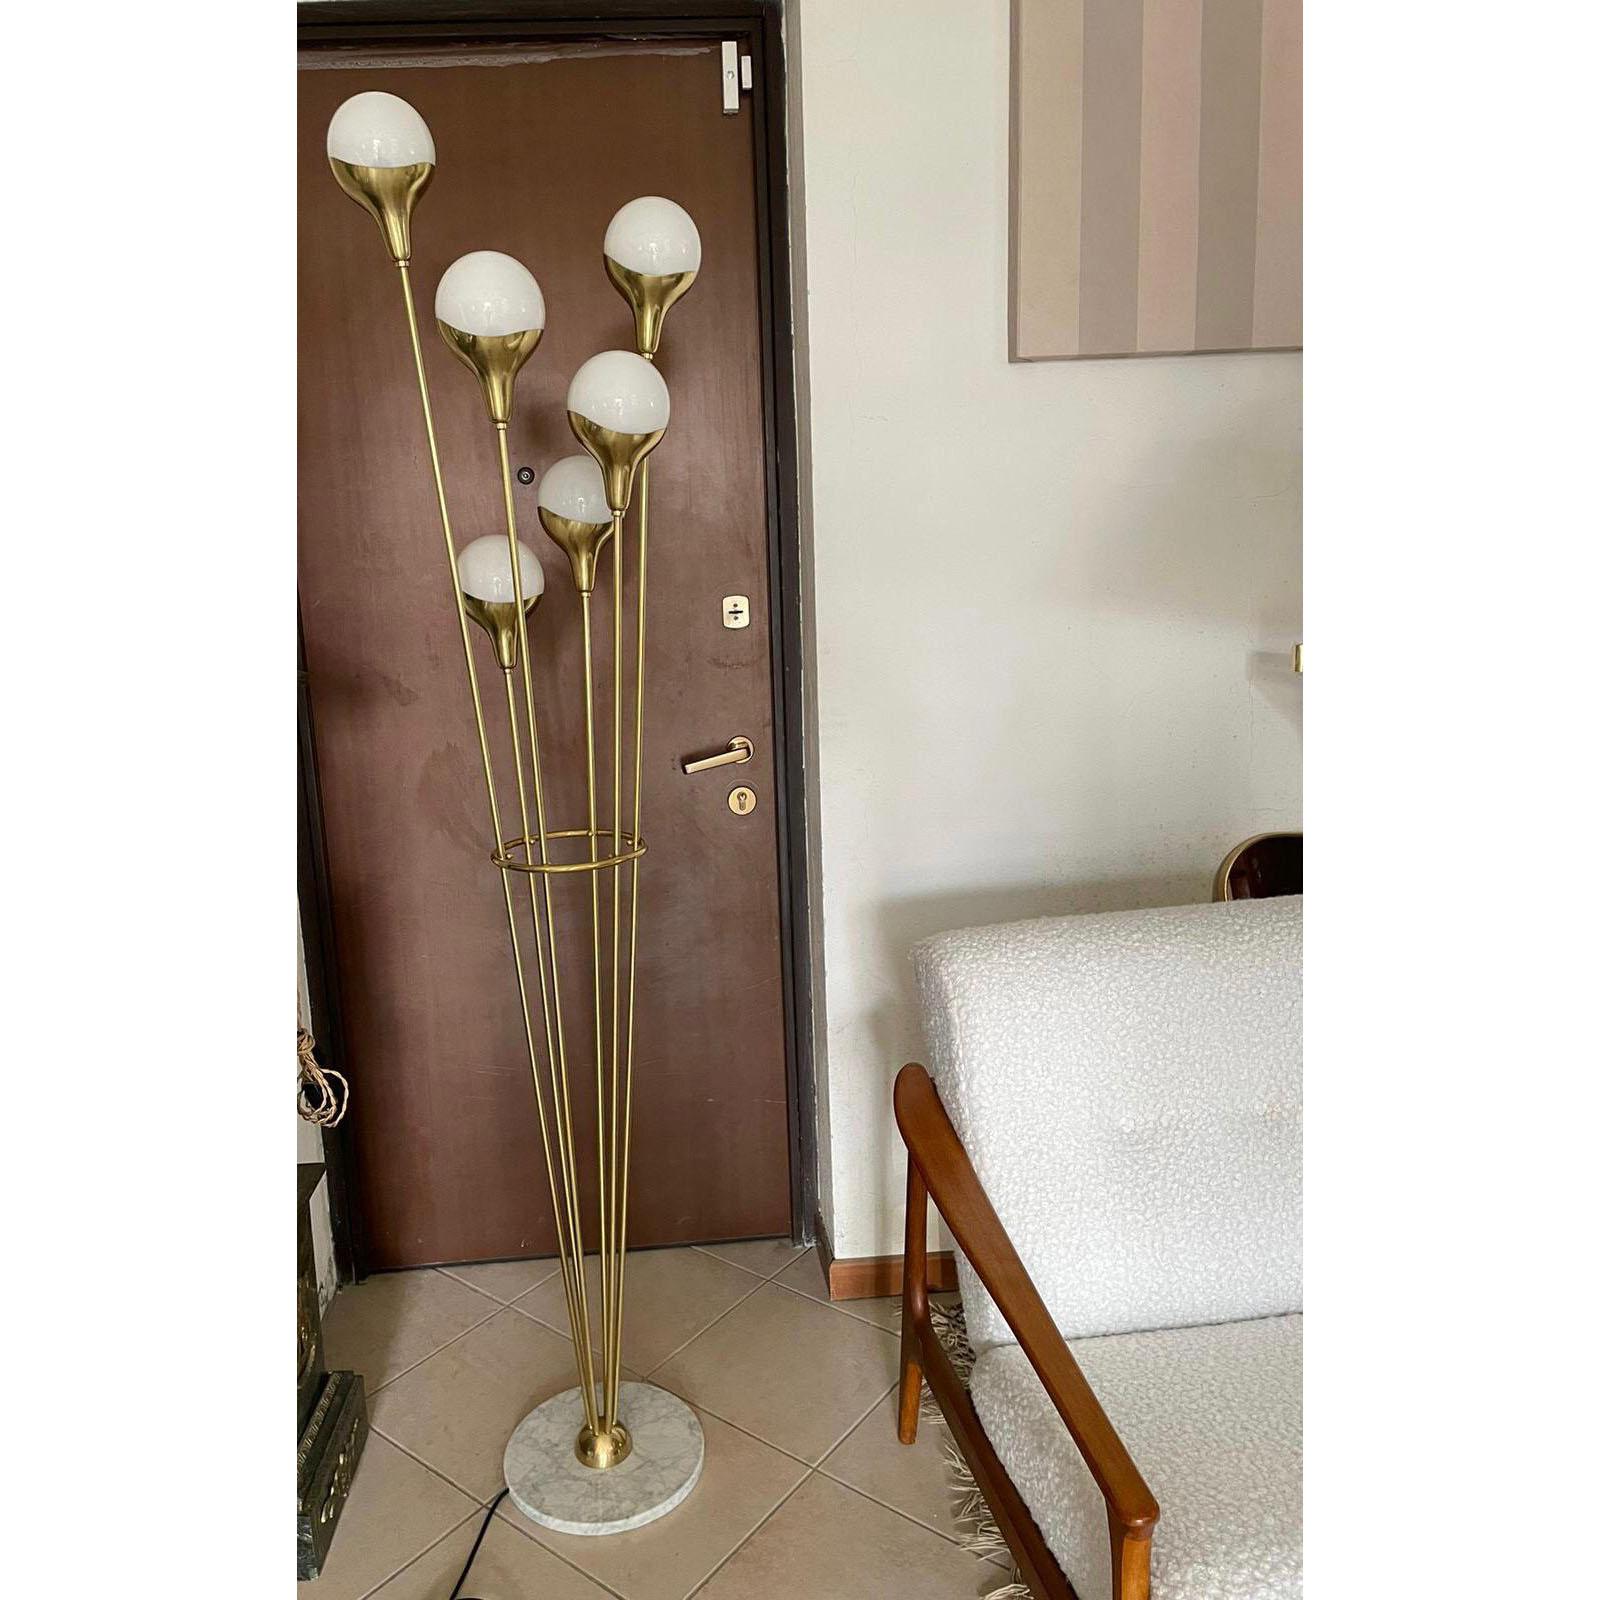 Floor lamp with six opaline shades, brass accents and marble base. 
In the style of Stilnovo, Italy. 
Dimensions. H 187 cm x Dm 46 cm. 
E14 standard delivery.
On request we can rewire it with E12 light bases for the US use.
Other customization